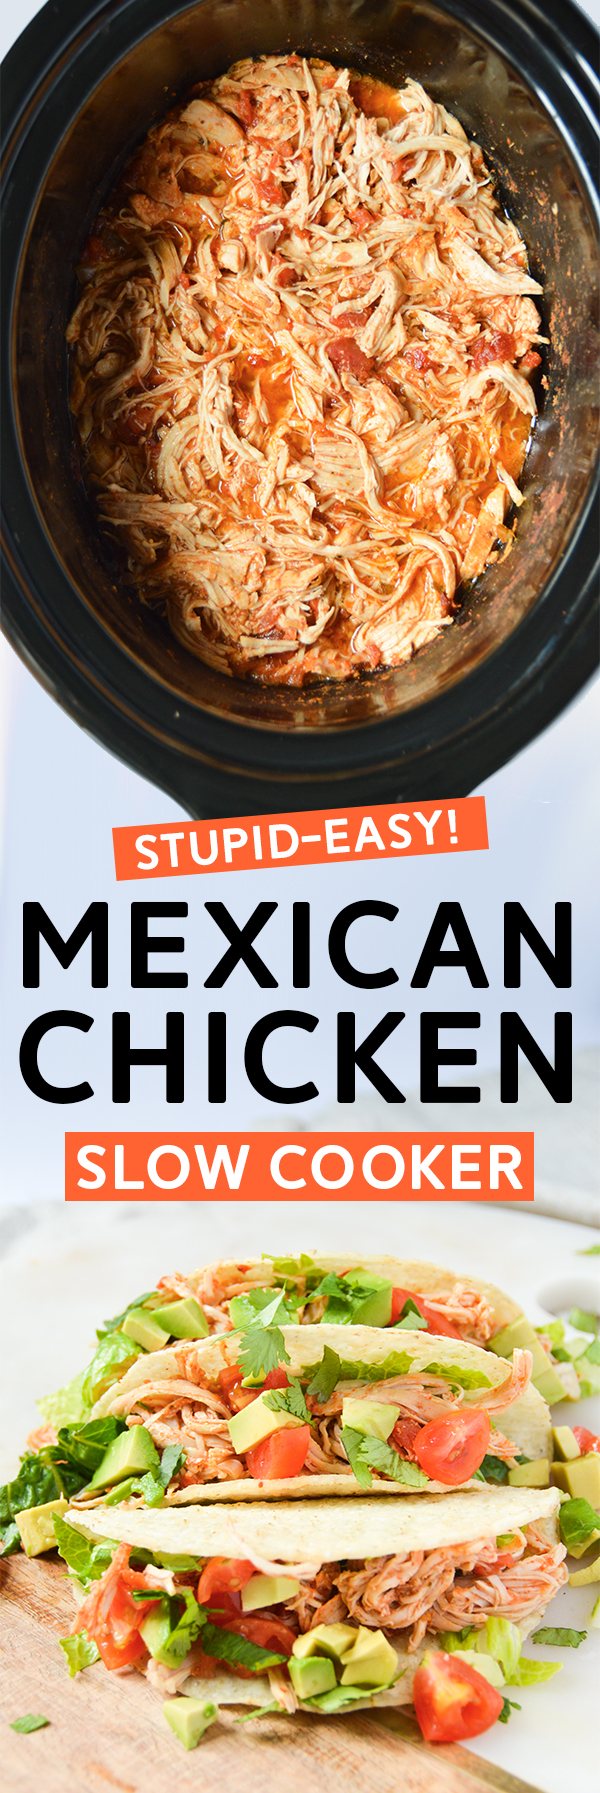 Stupid-Easy Slow Cooker Shredded Mexican Kitchen - Only three ingredients needed to make this easy shredded Mexican chicken. Just pop it in the slow cooker and you'll have a delicious, flavorful chicken recipe. #chickenrecipe #chicken #slowcookerrecipe #recipe #slowcooker